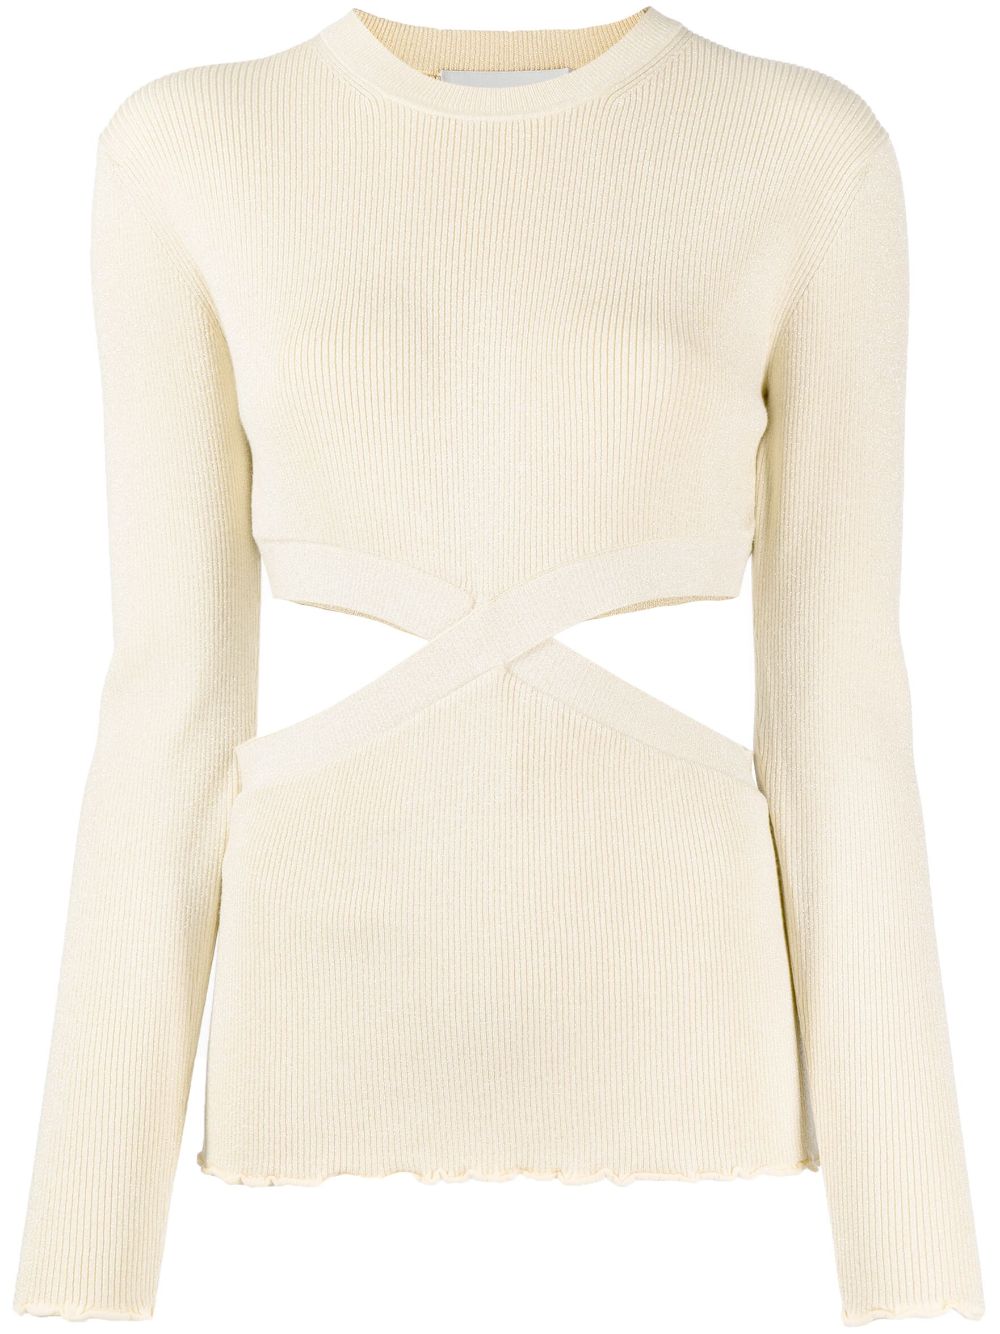 Image 1 of 3.1 Phillip Lim lurex cut-out knitted top